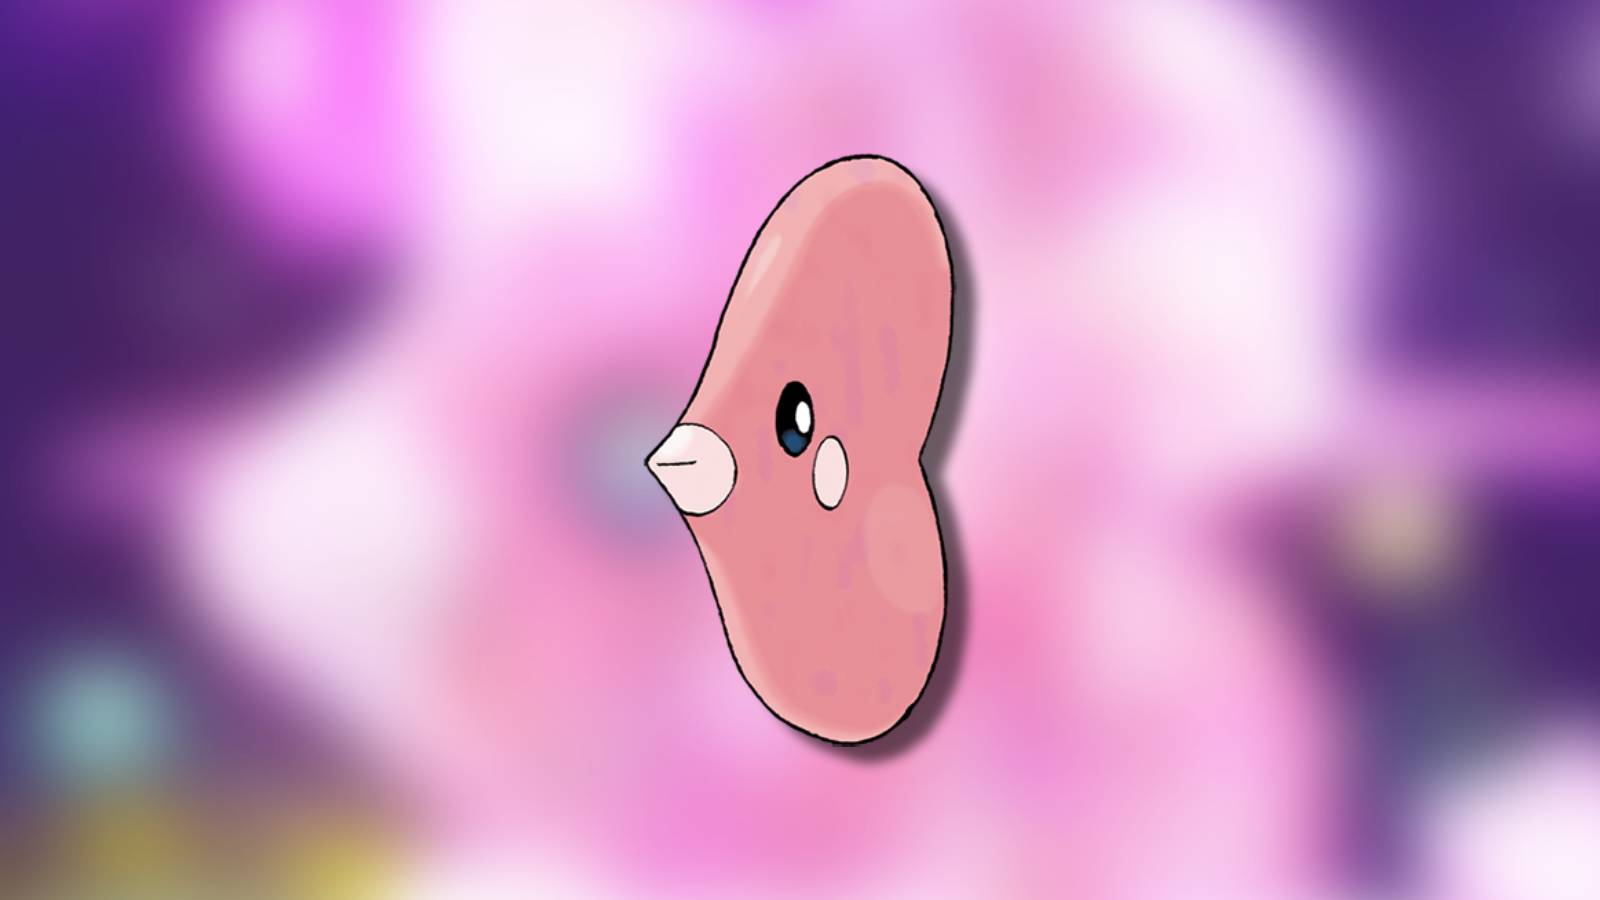 The Pokemon Luvdisc appears against a blurred background